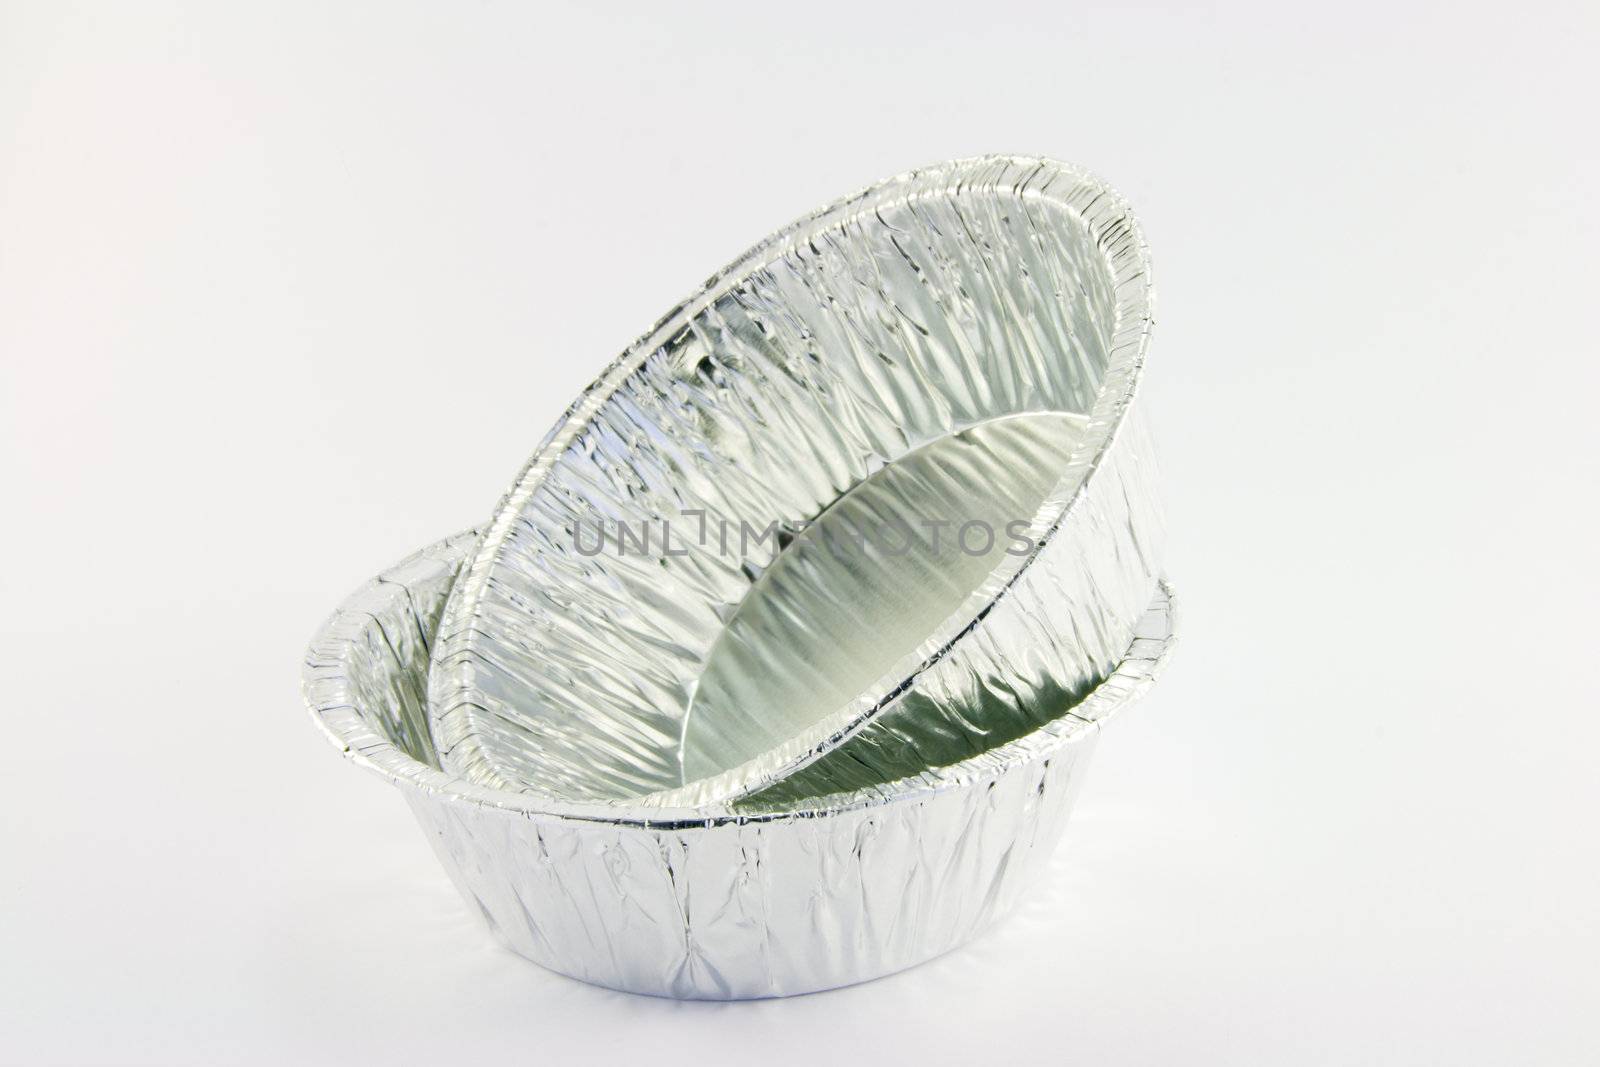 Two small round foil catering trays on a white background